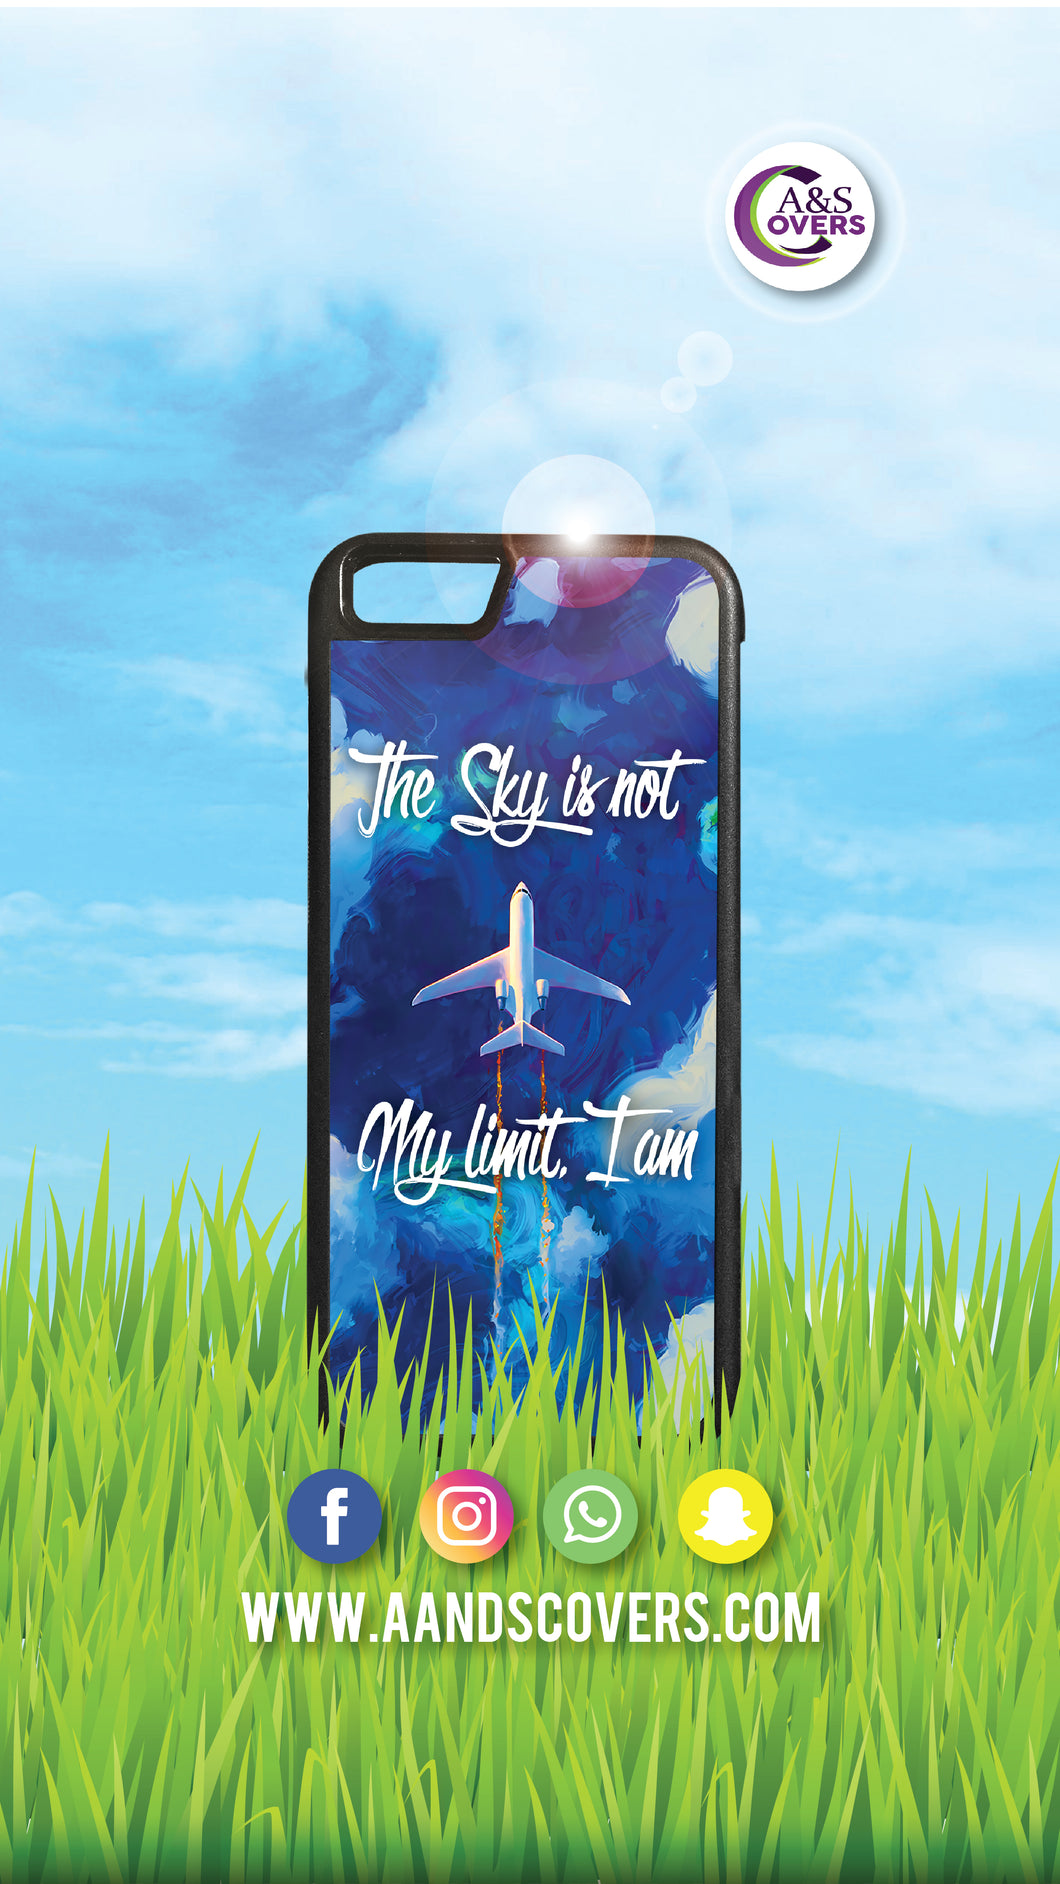 The sky is not my limit (wallpaper) - A&S Covers